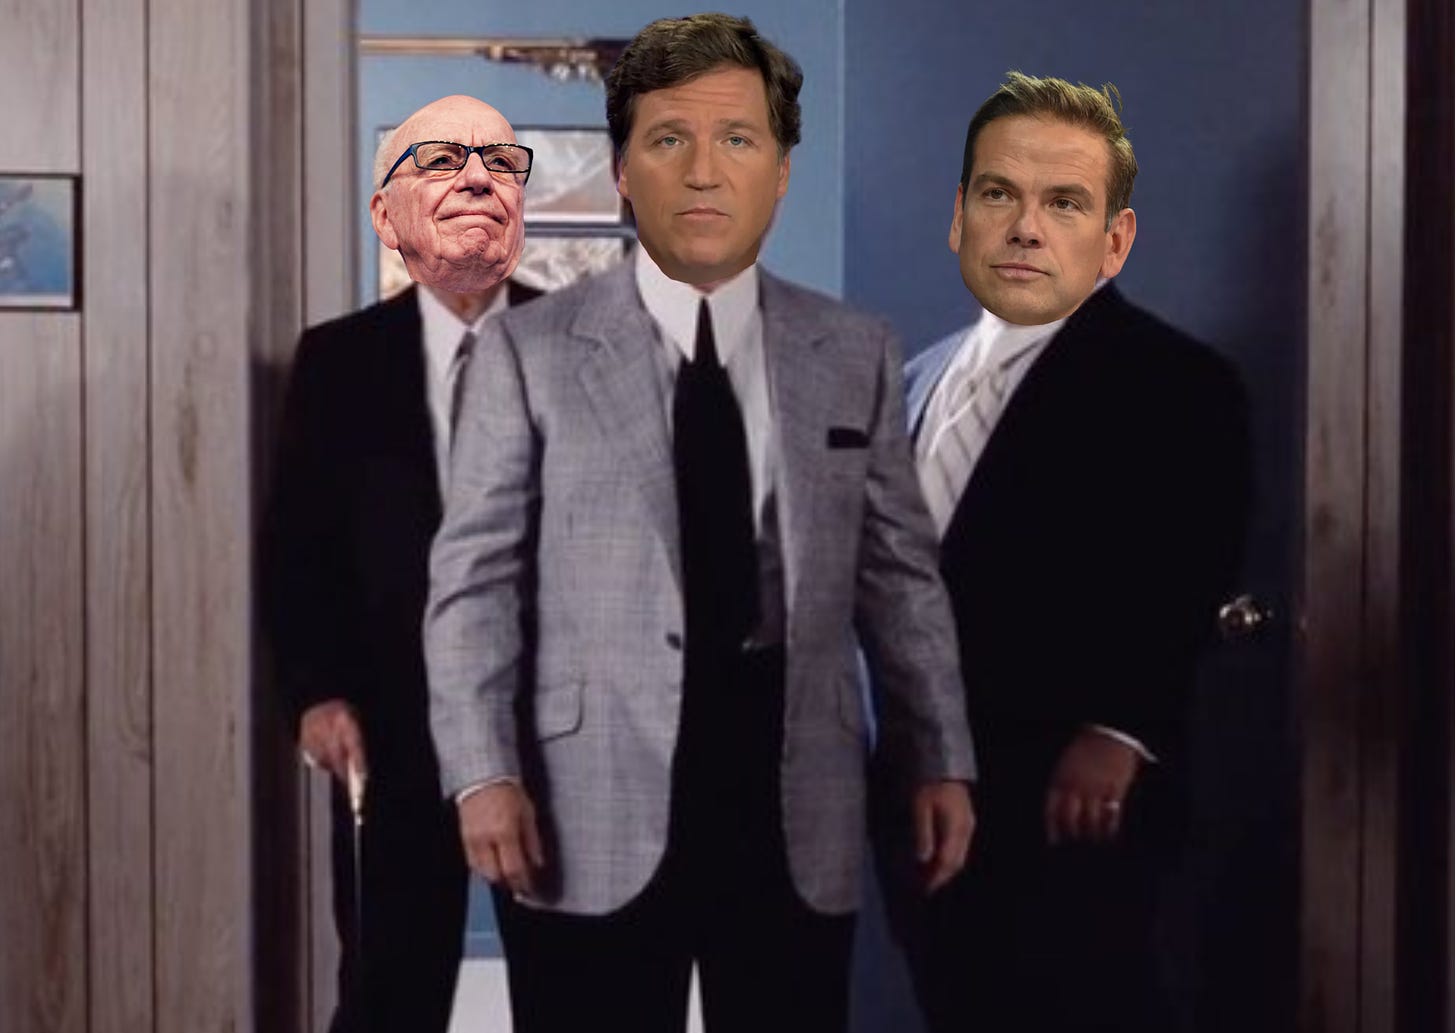 Murdoch and Lachlan do away with Tucker Carlson